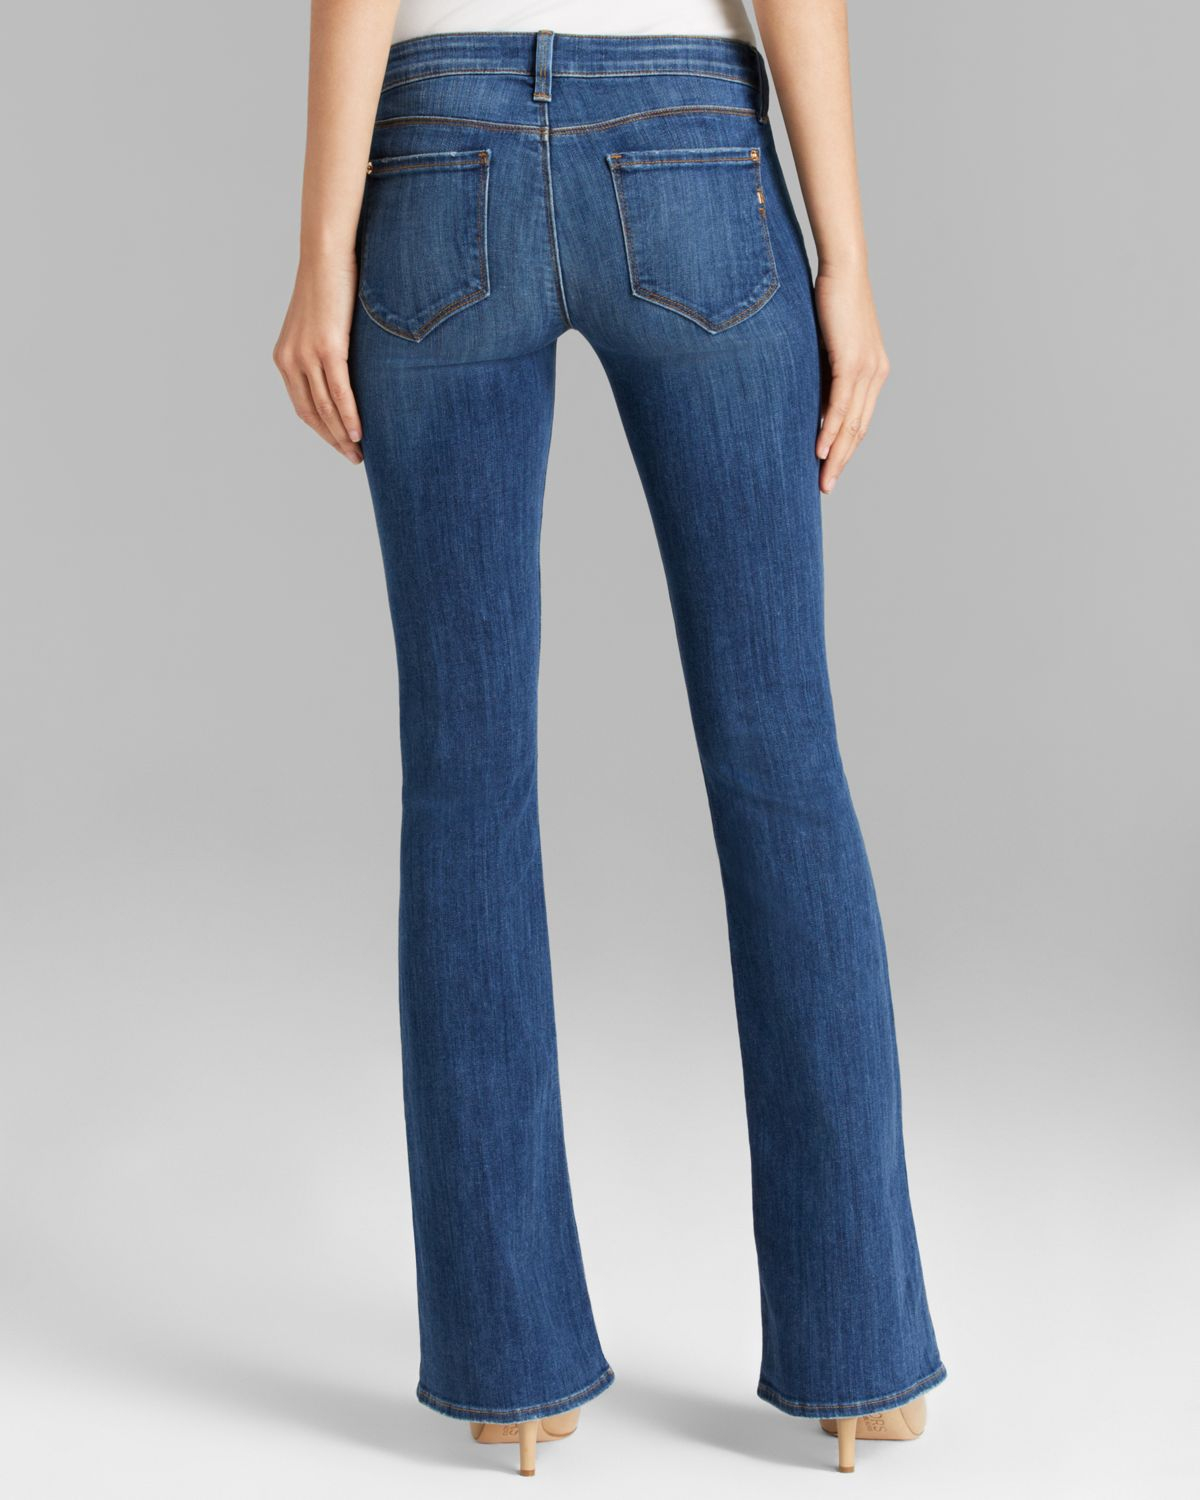 Genetic Denim Jeans Leaf Fit and Flare in Blue - Lyst